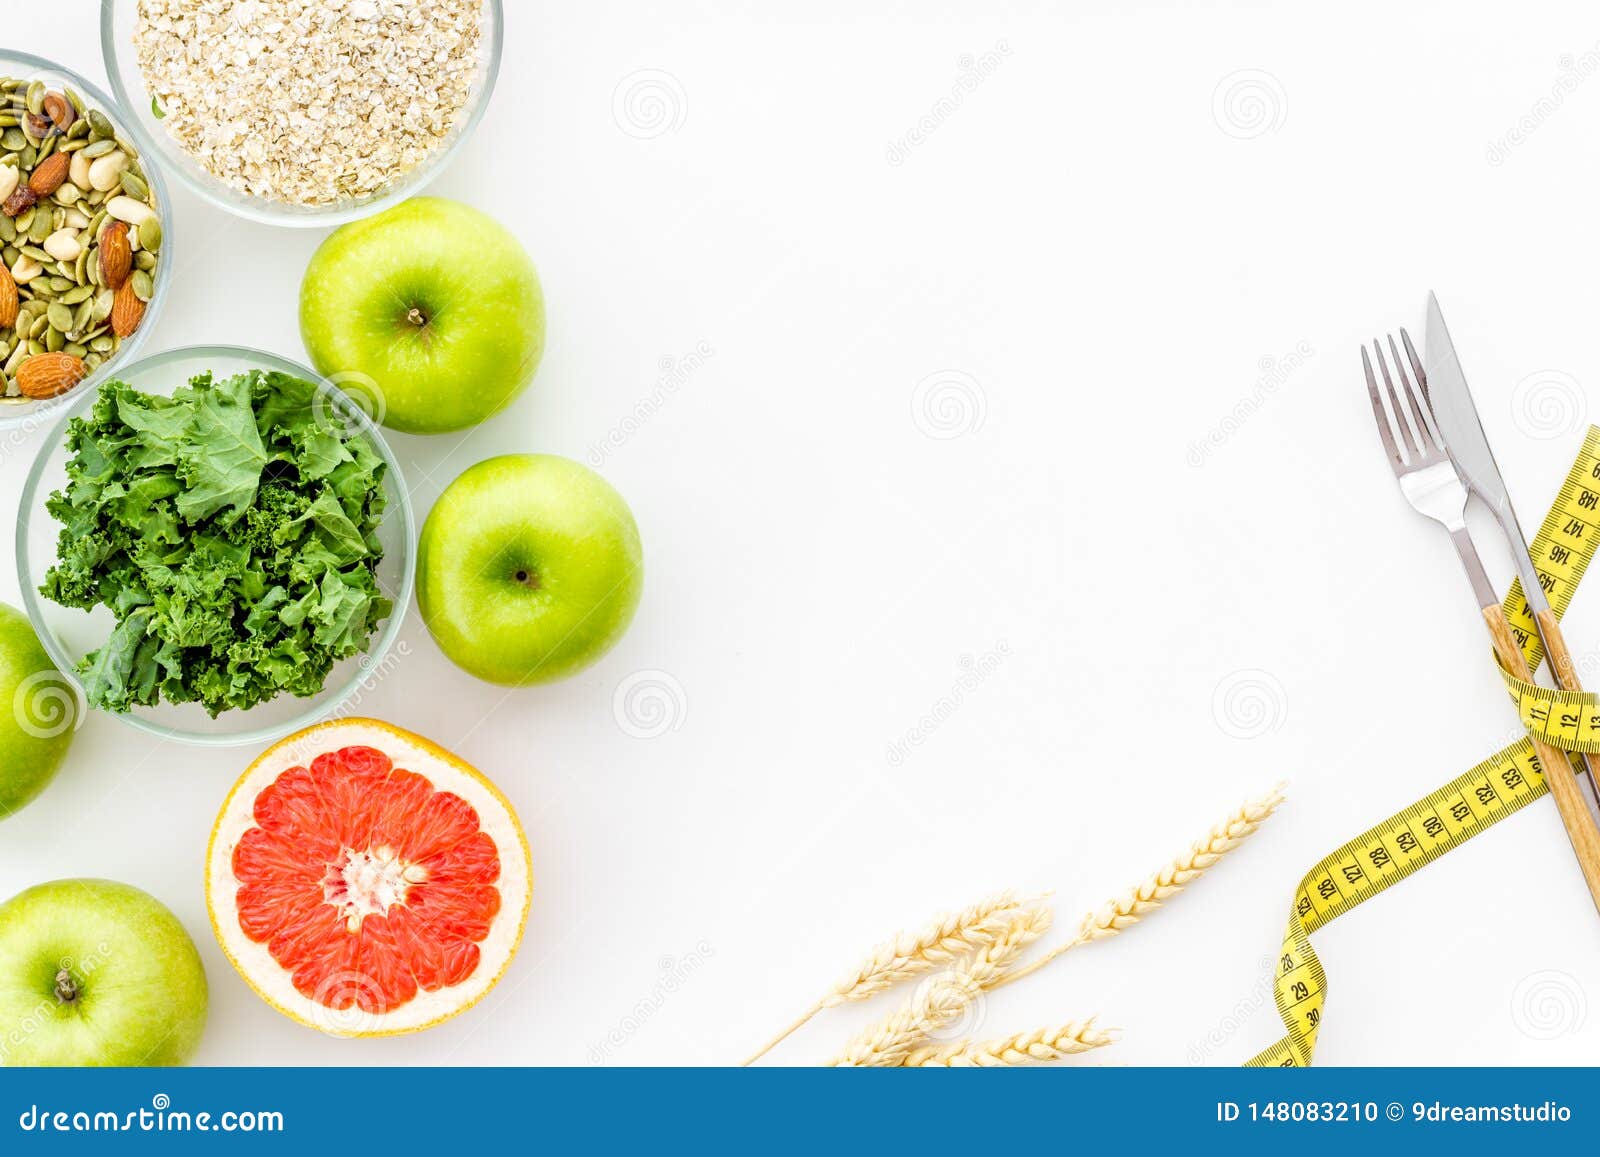 Download Measuring Tape, Apples, Oat Meal And Grapefruit For ...